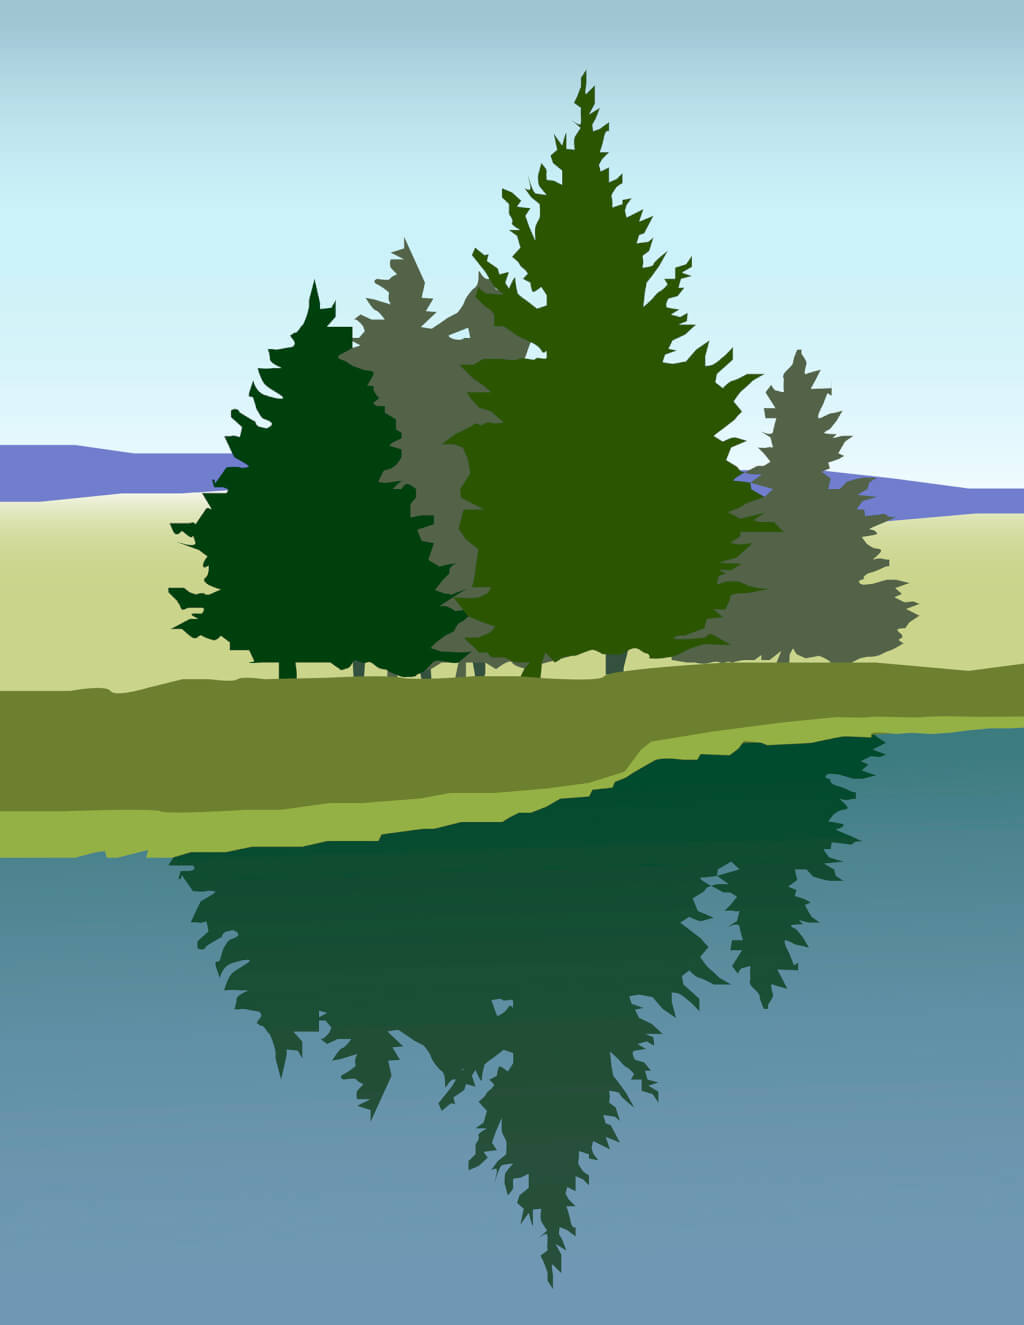 Robin Botie of ithaca, New York, uses Photoshop and Adobe Illustrator to show a stand of trees representing the new Ithaca chapter of The Compassionate Friends, a worldwide child loss grief support group helping bereaved families grow and heal.